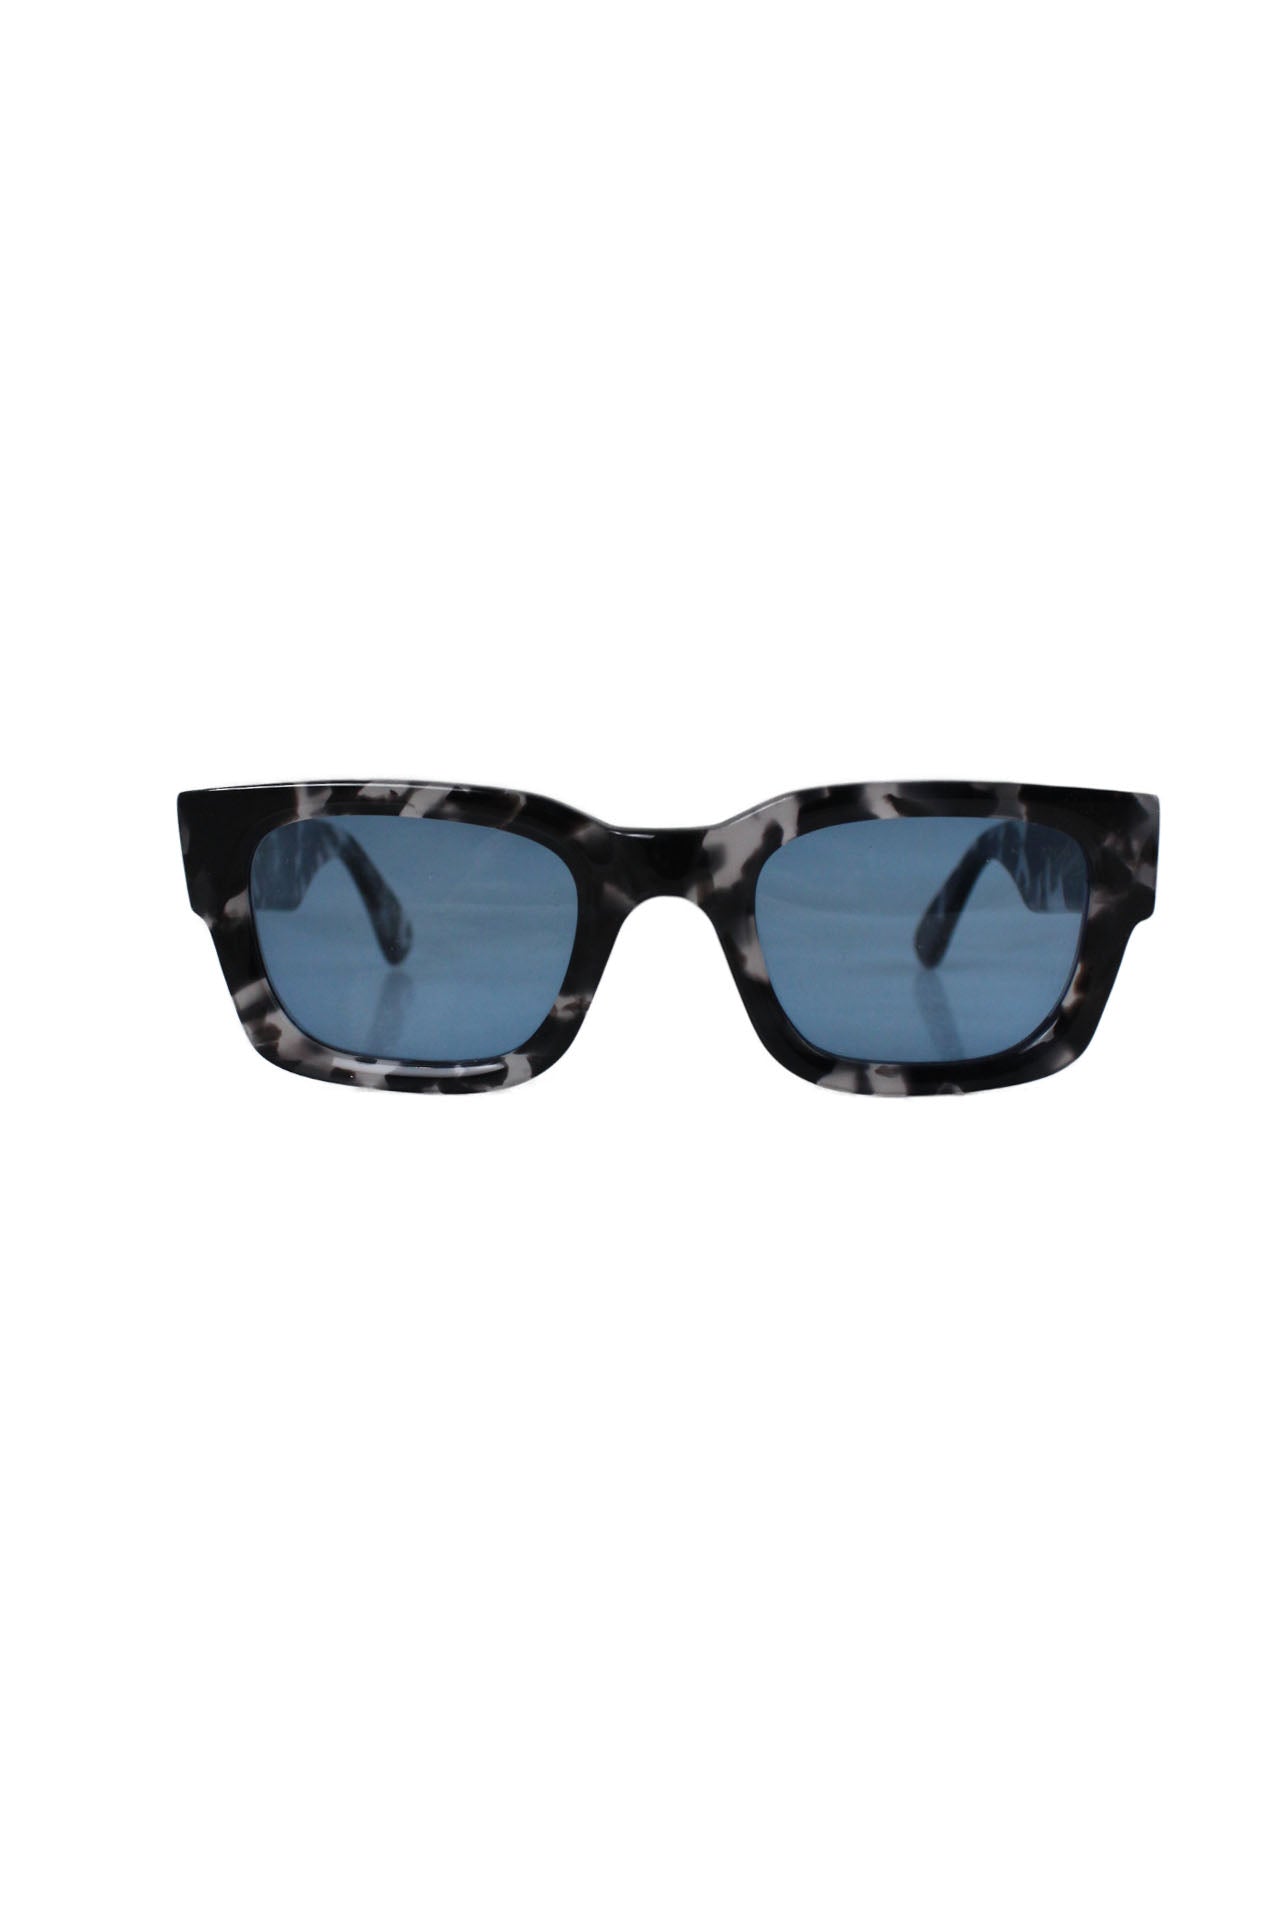 front of holls black tortoiseshell sunglasses. features blue toned lenses, and square shape.